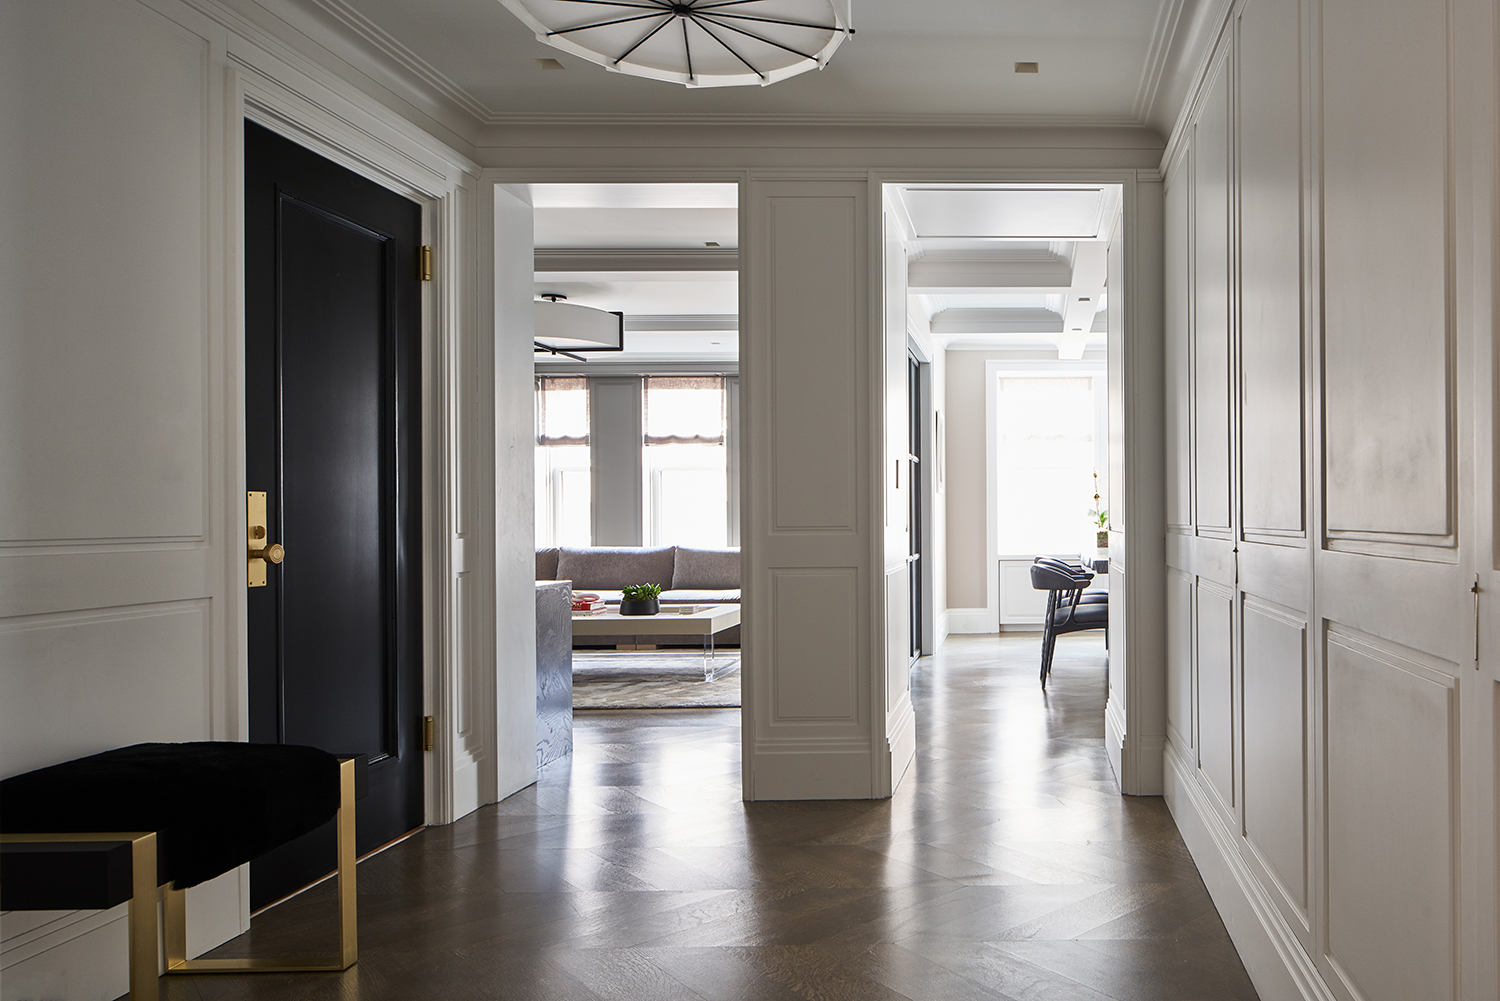 Should The Entryway Be The Same Color As The Living Room? |